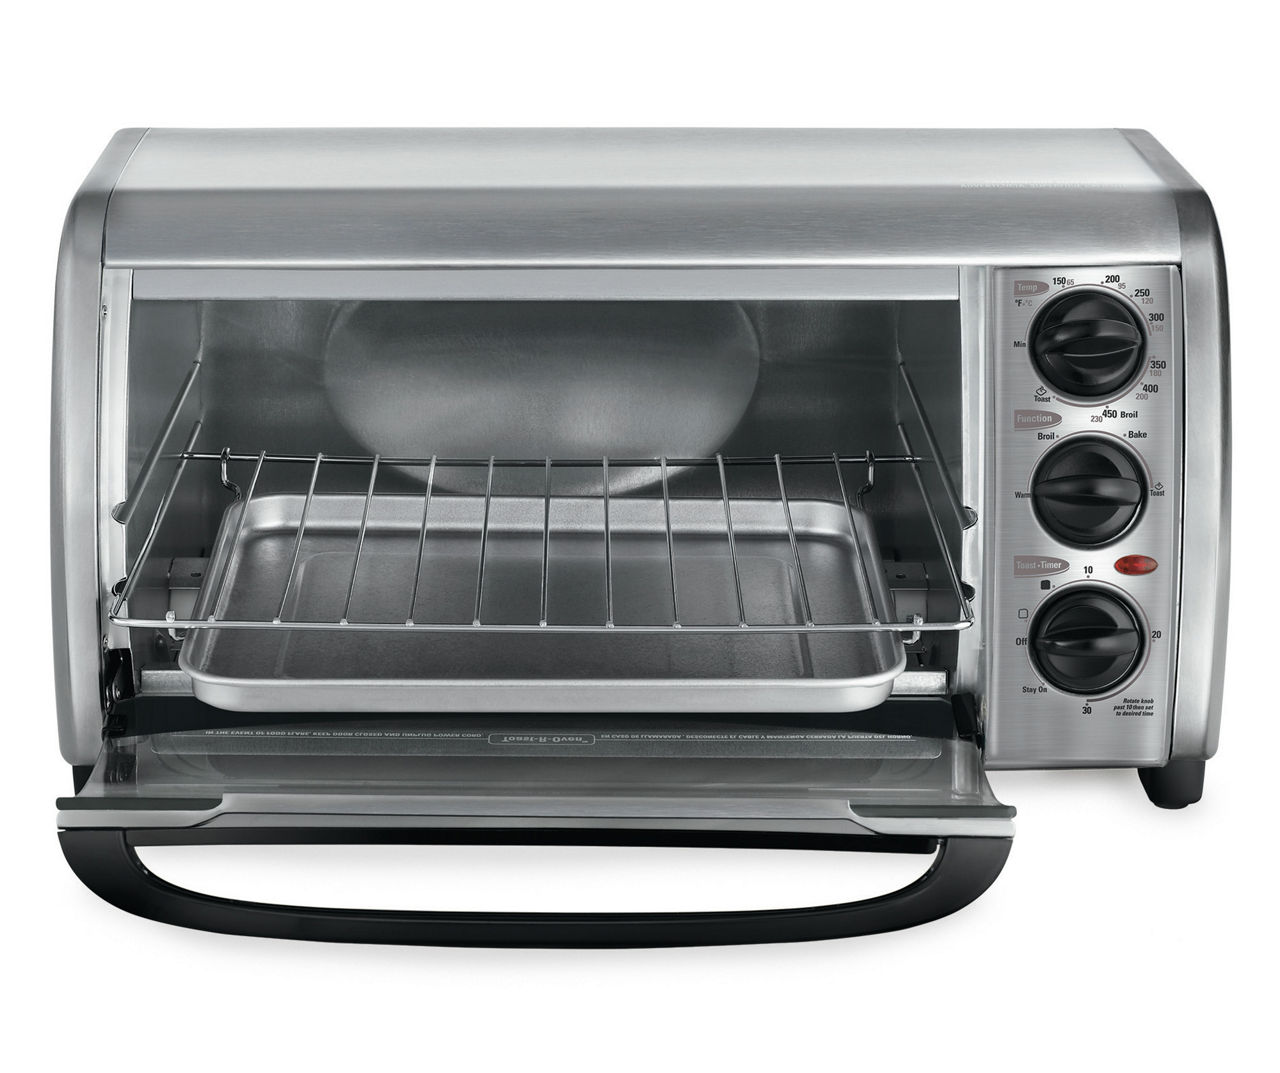 BLACK+DECKER Toaster Ovens for sale, Shop with Afterpay